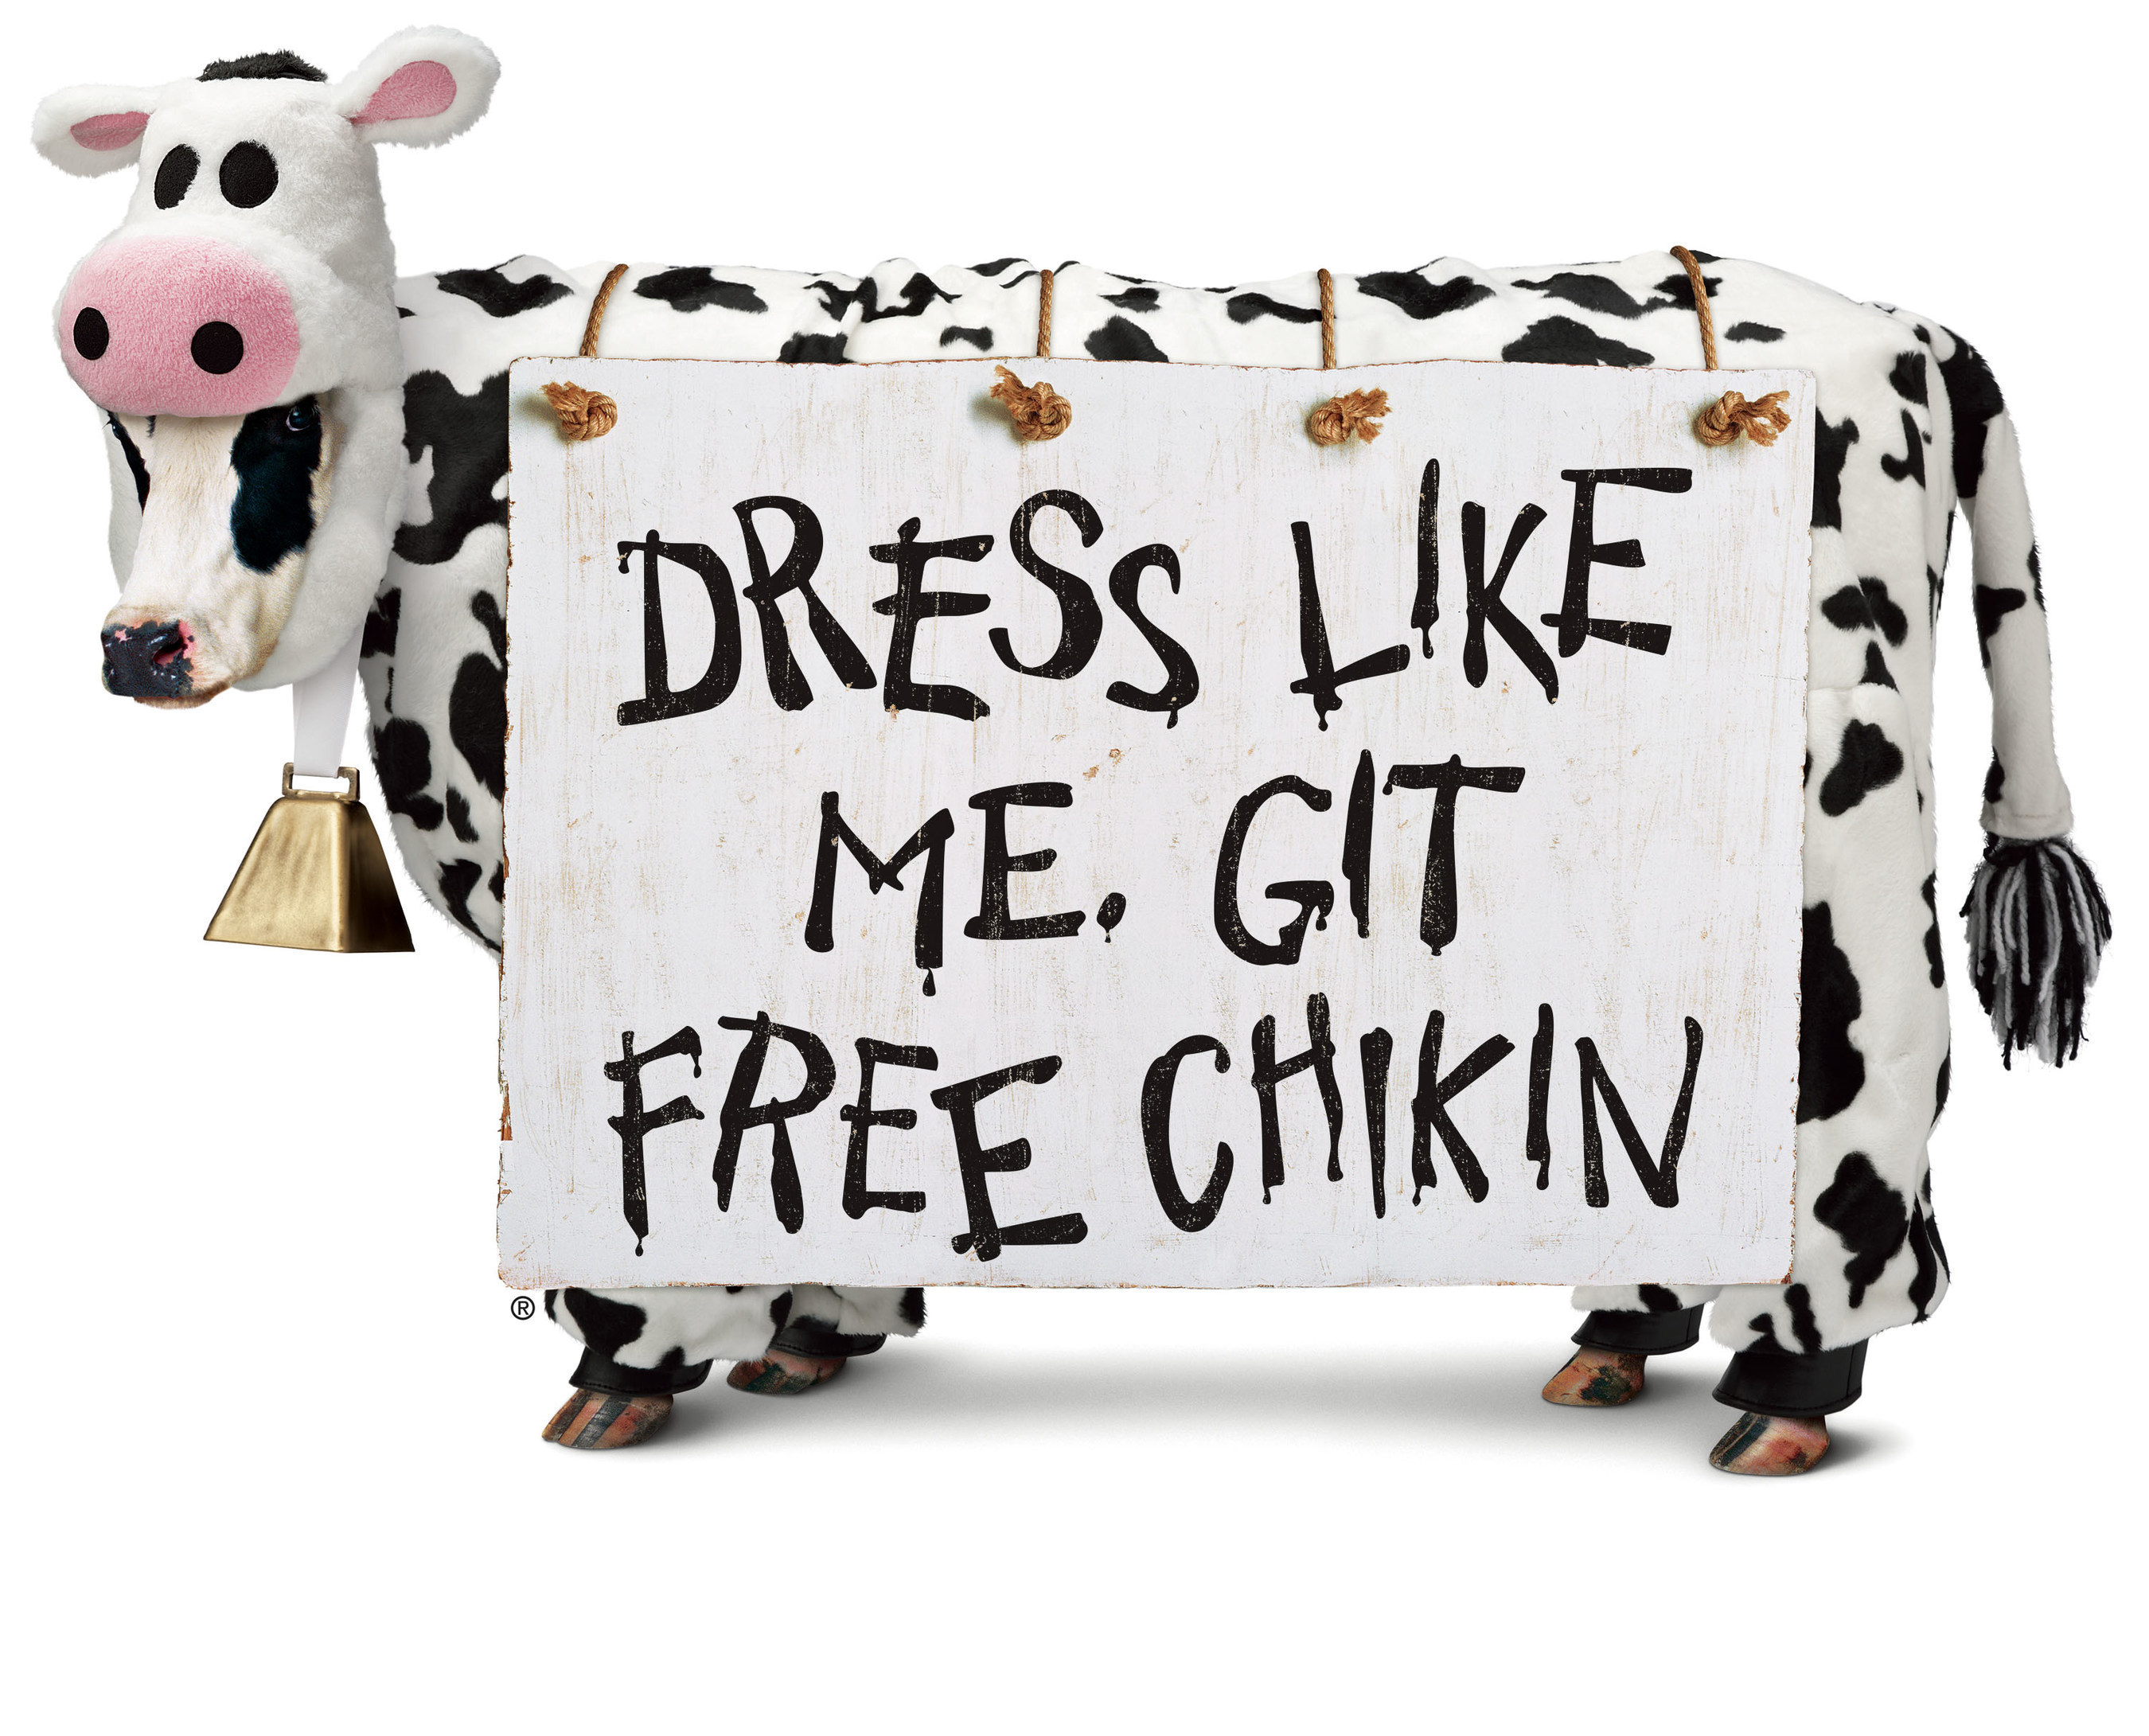 Dress like a Cow for Cow Appreciation Day and earn a FREE meal.